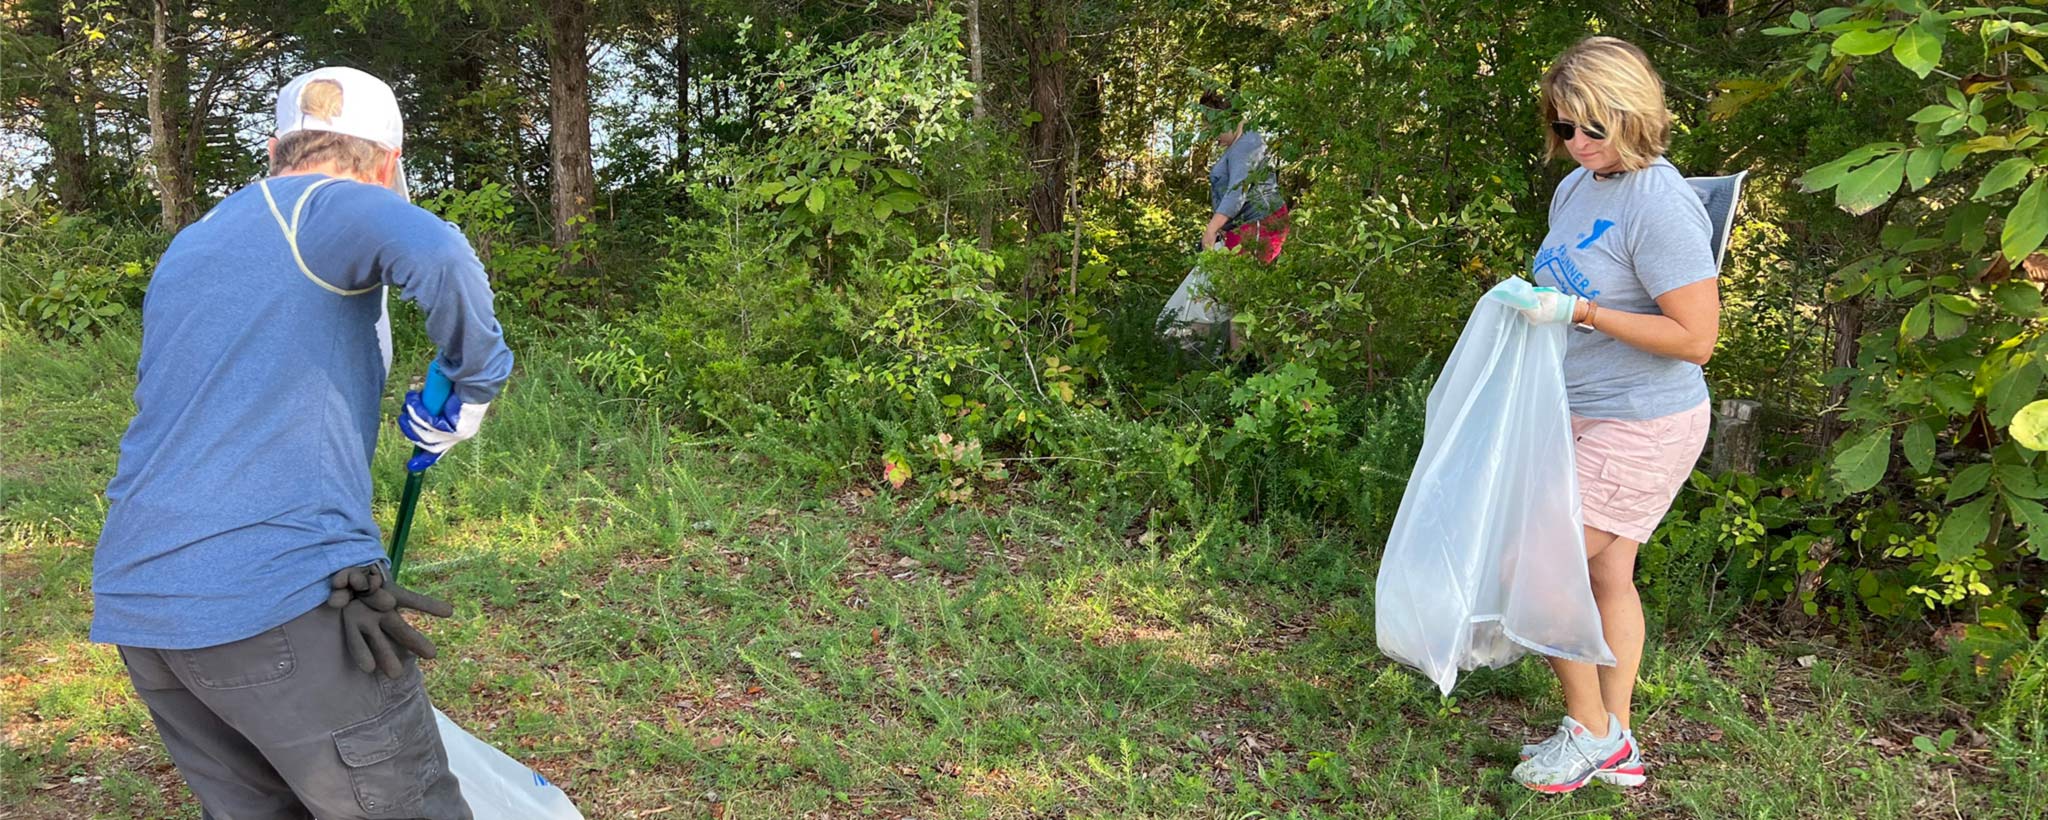 volunteers picking up trash from a campsite on Pilot Island in Lake Norris